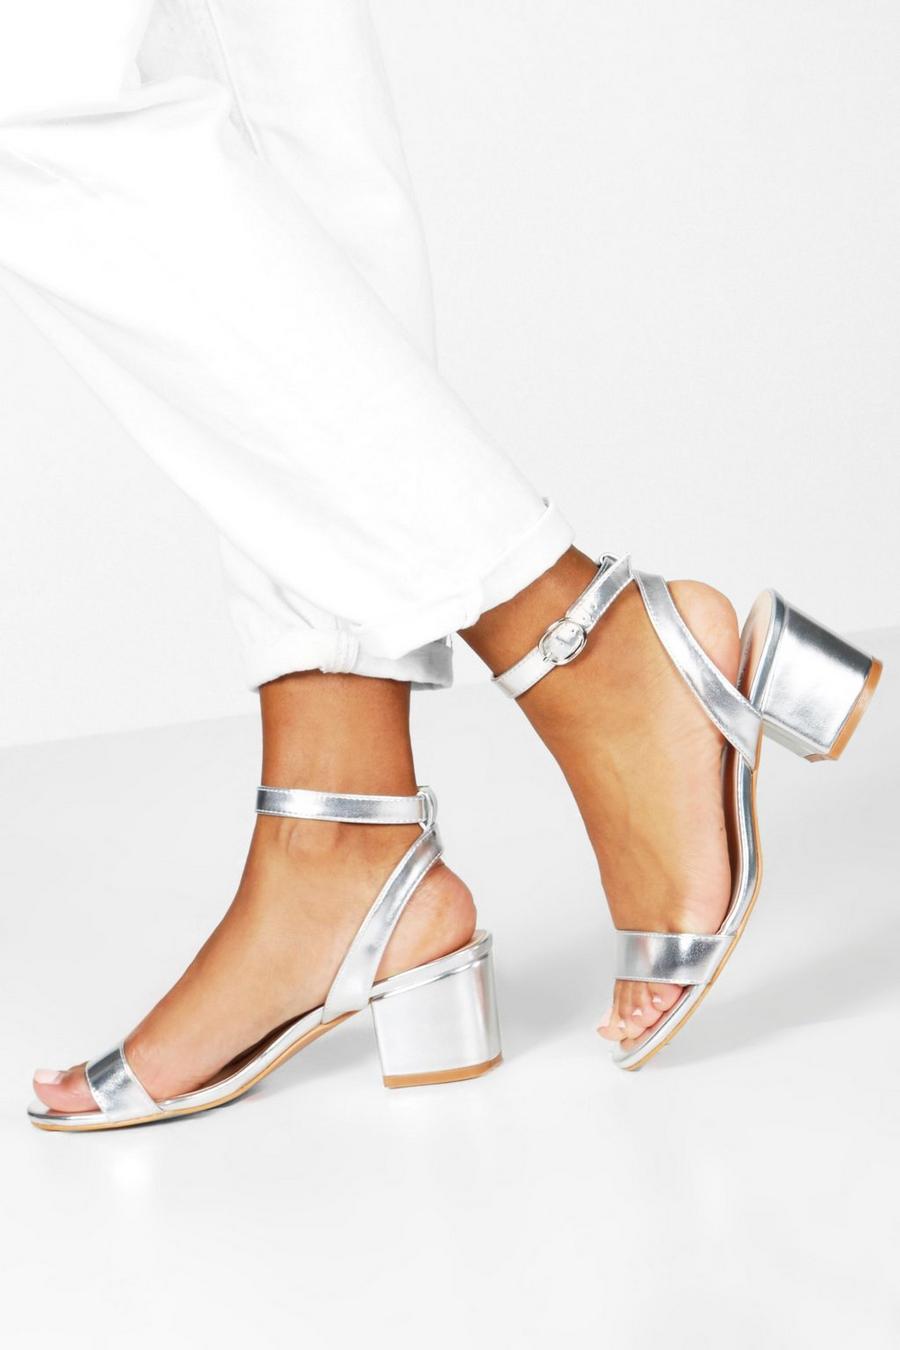 Silver argent Metallic Basic Low Block Barely There Heels